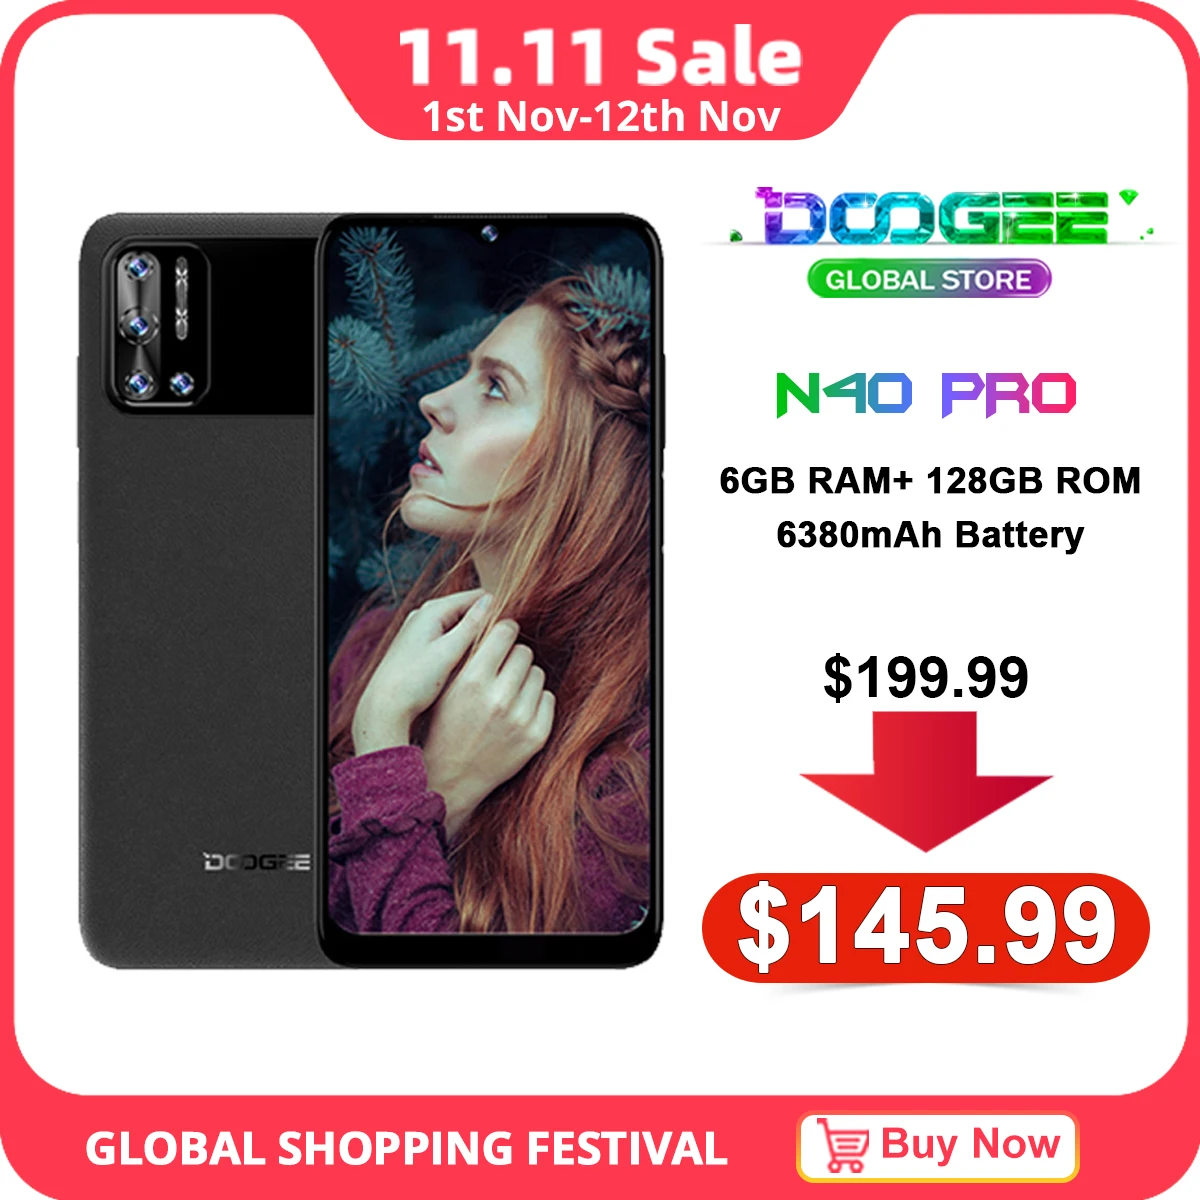 

DOOGEE N40 Pro Mobile Phone 6380mAh Battery 20MP Quad Rear Camera Helio P60 6GB+128GB 6.5" 24W fast Charging Cellphone